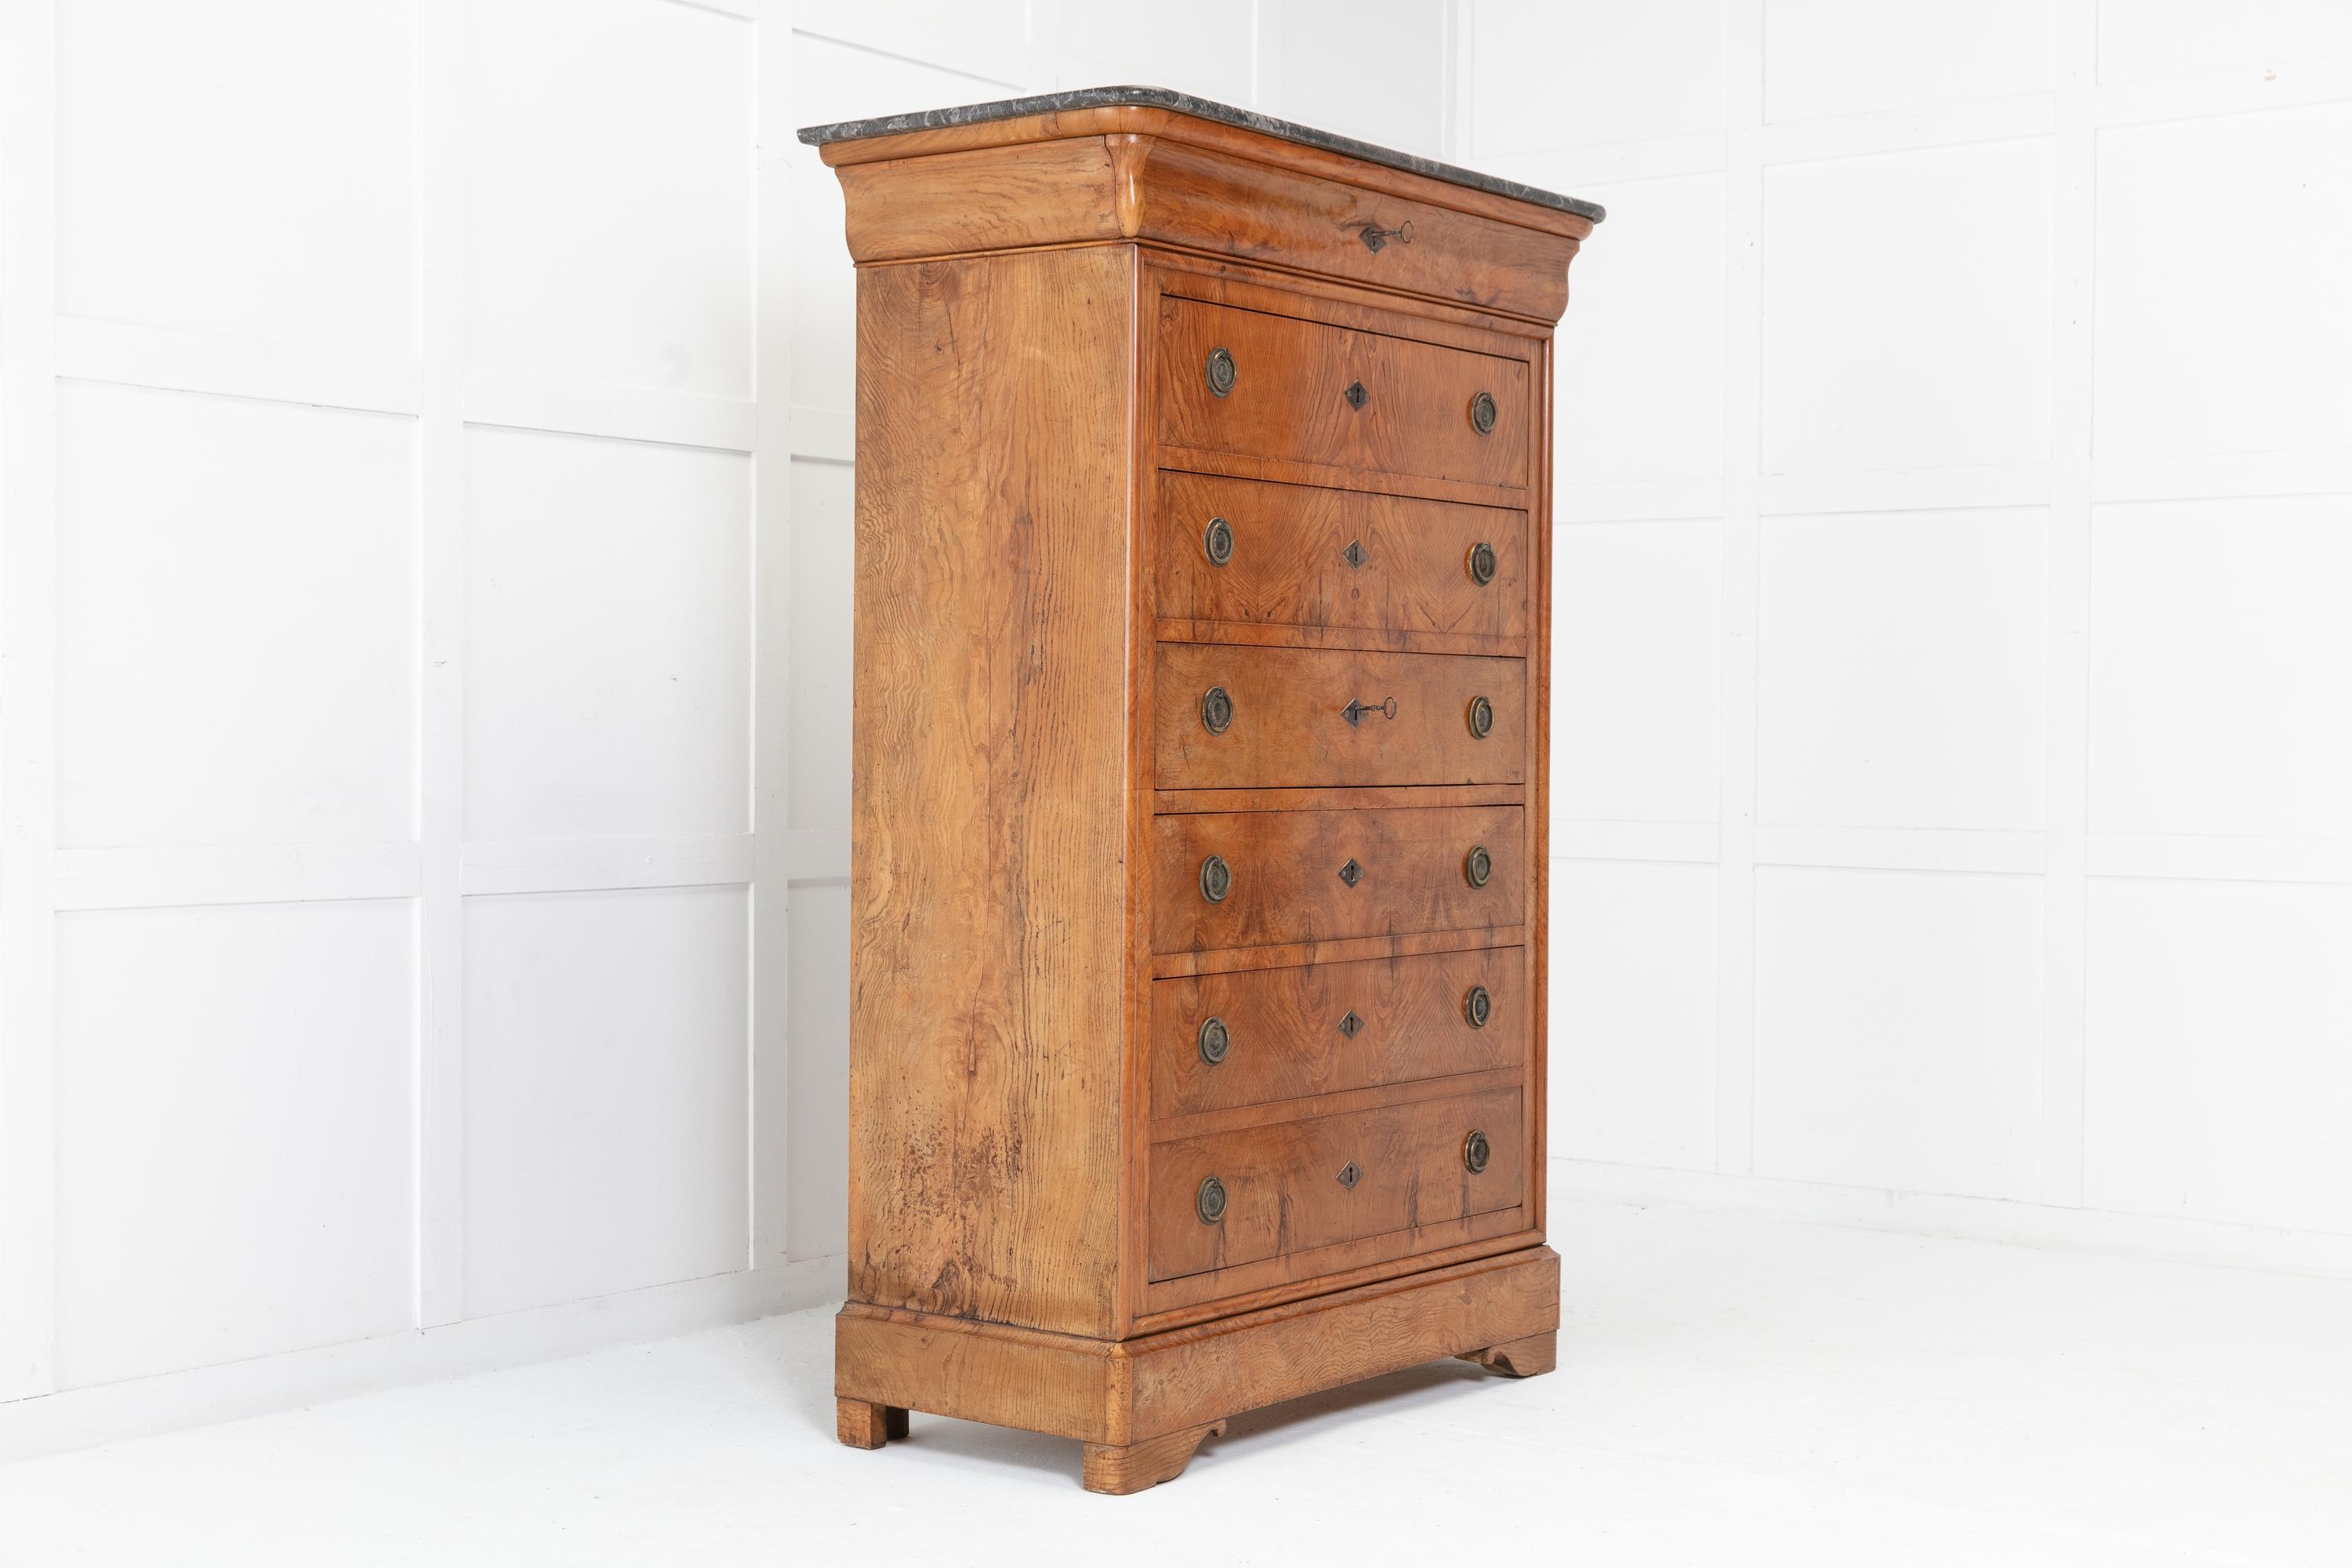 A tall 19th century French ash semainier with secre´taire drawer and original grey and white veined marble top. The top moulded cornice has a long and shaped drawer with lock and key. Below are a further six drawers with brass handles. The middle